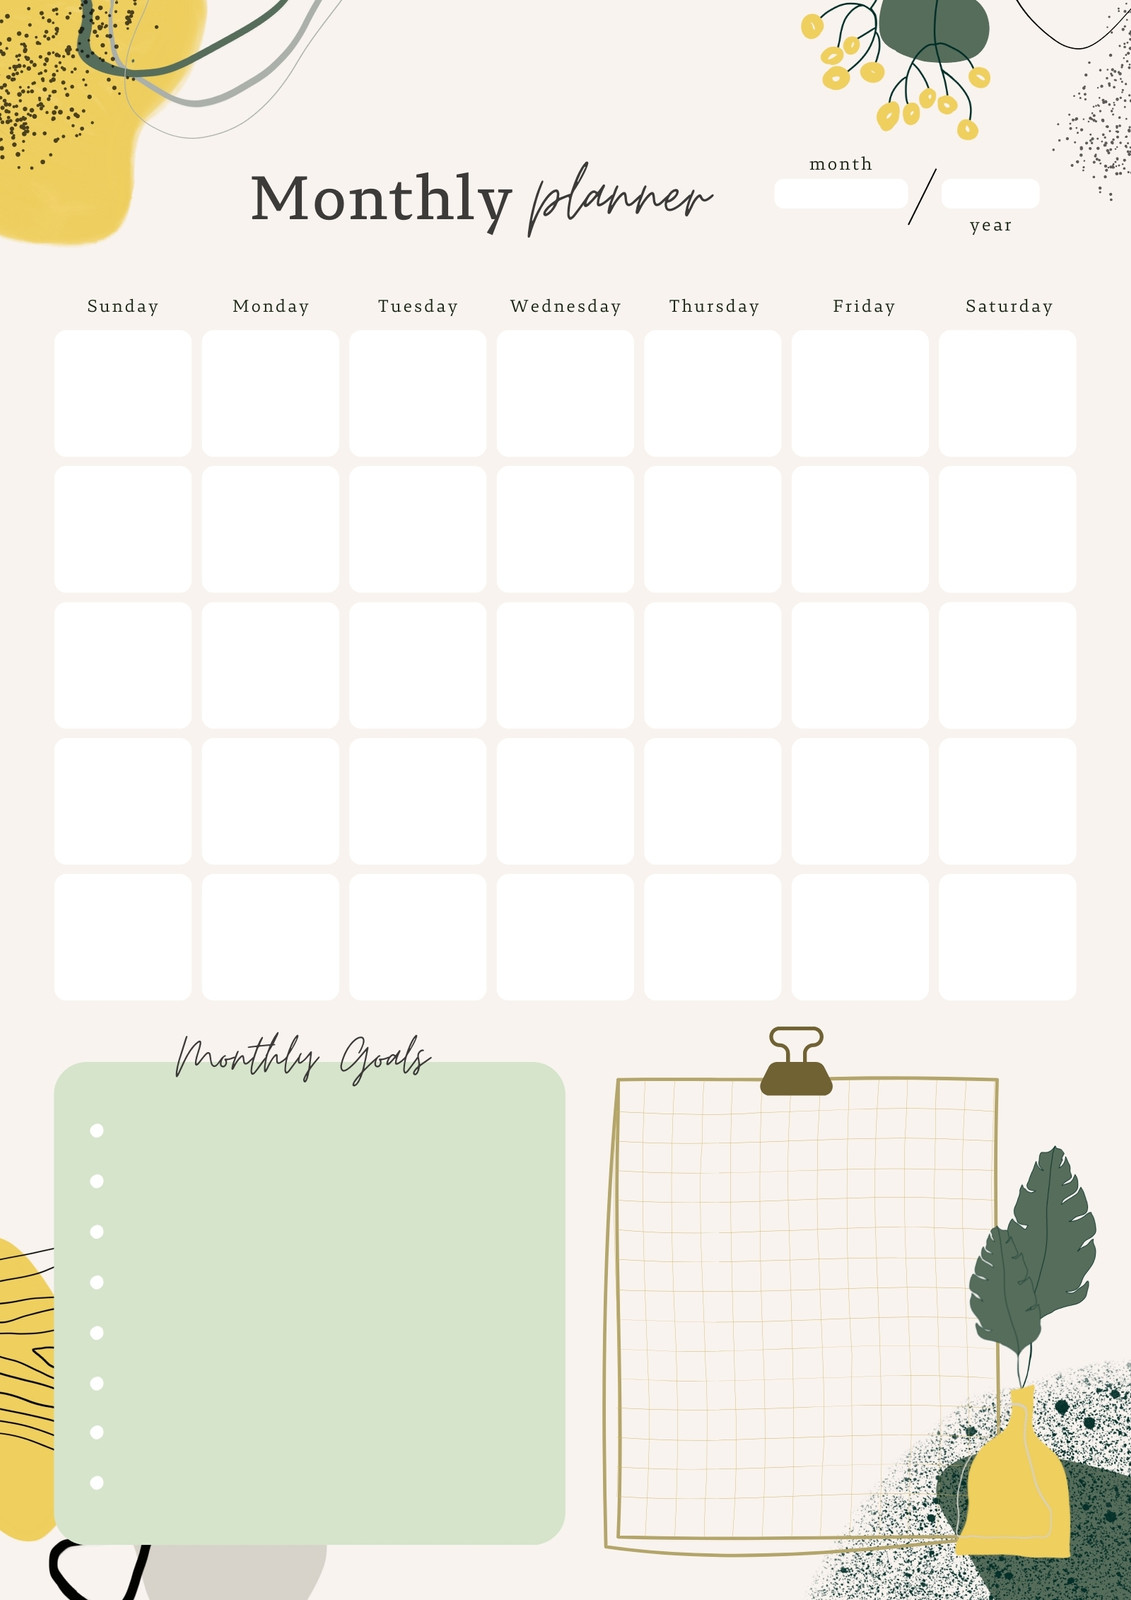 Free Creative Abstract Bullet Journal General Planner template to